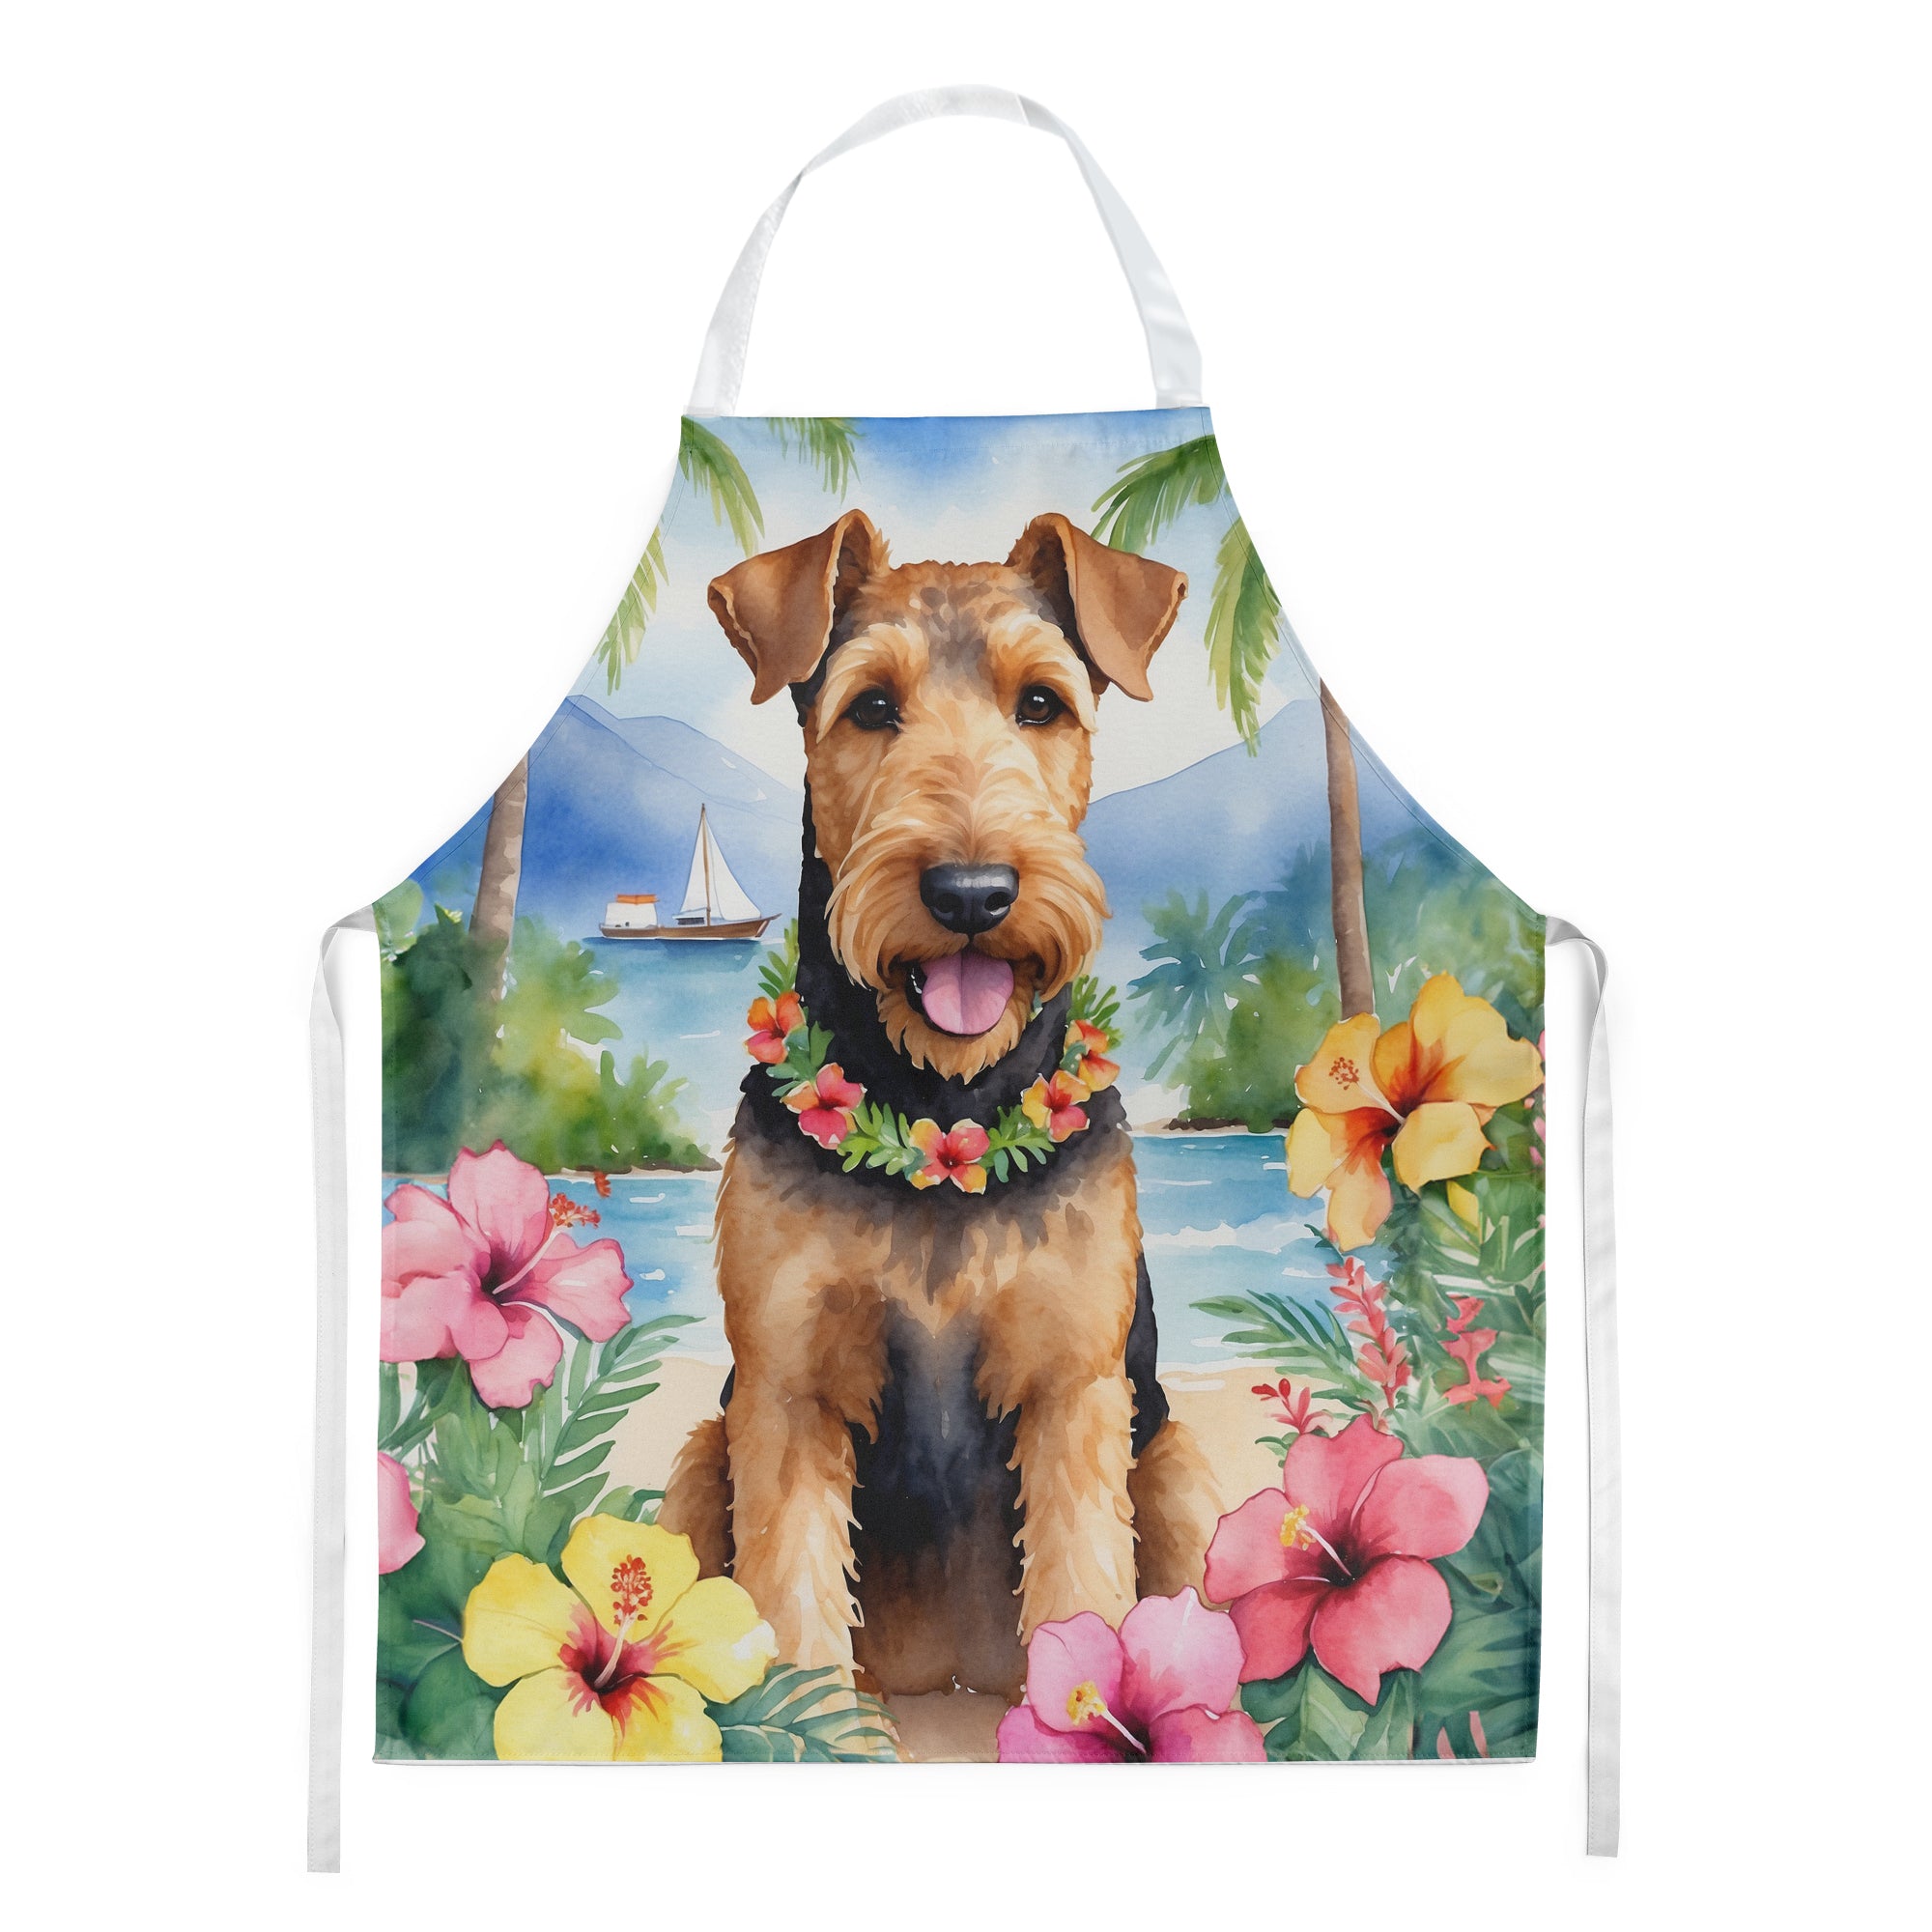 Buy this Airedale Terrier Luau Apron